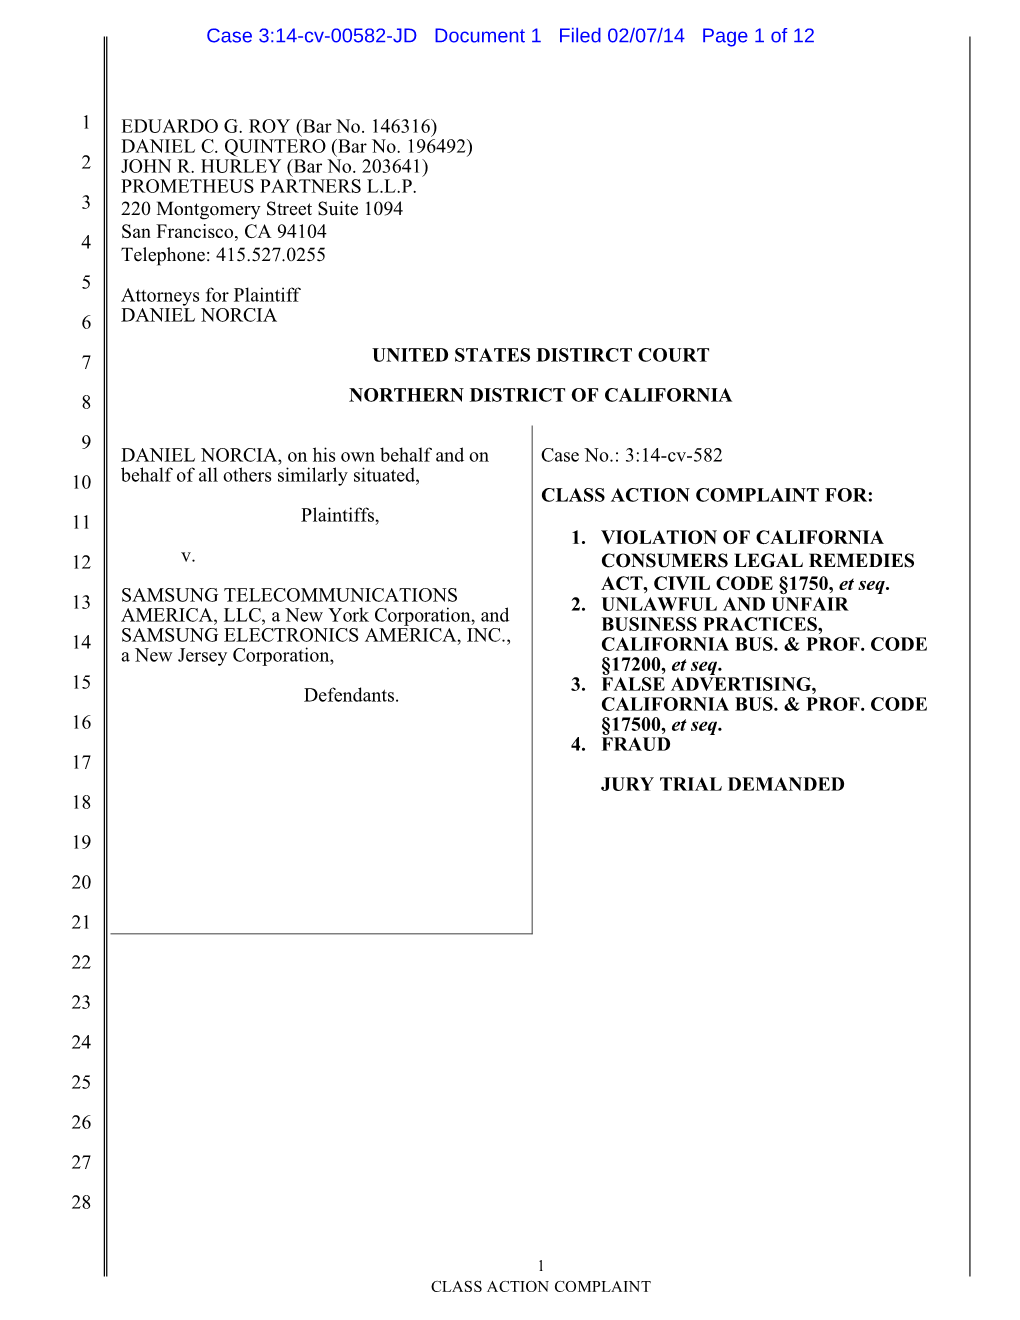 Case 3:14-Cv-00582-JD Document 1 Filed 02/07/14 Page 1 of 12